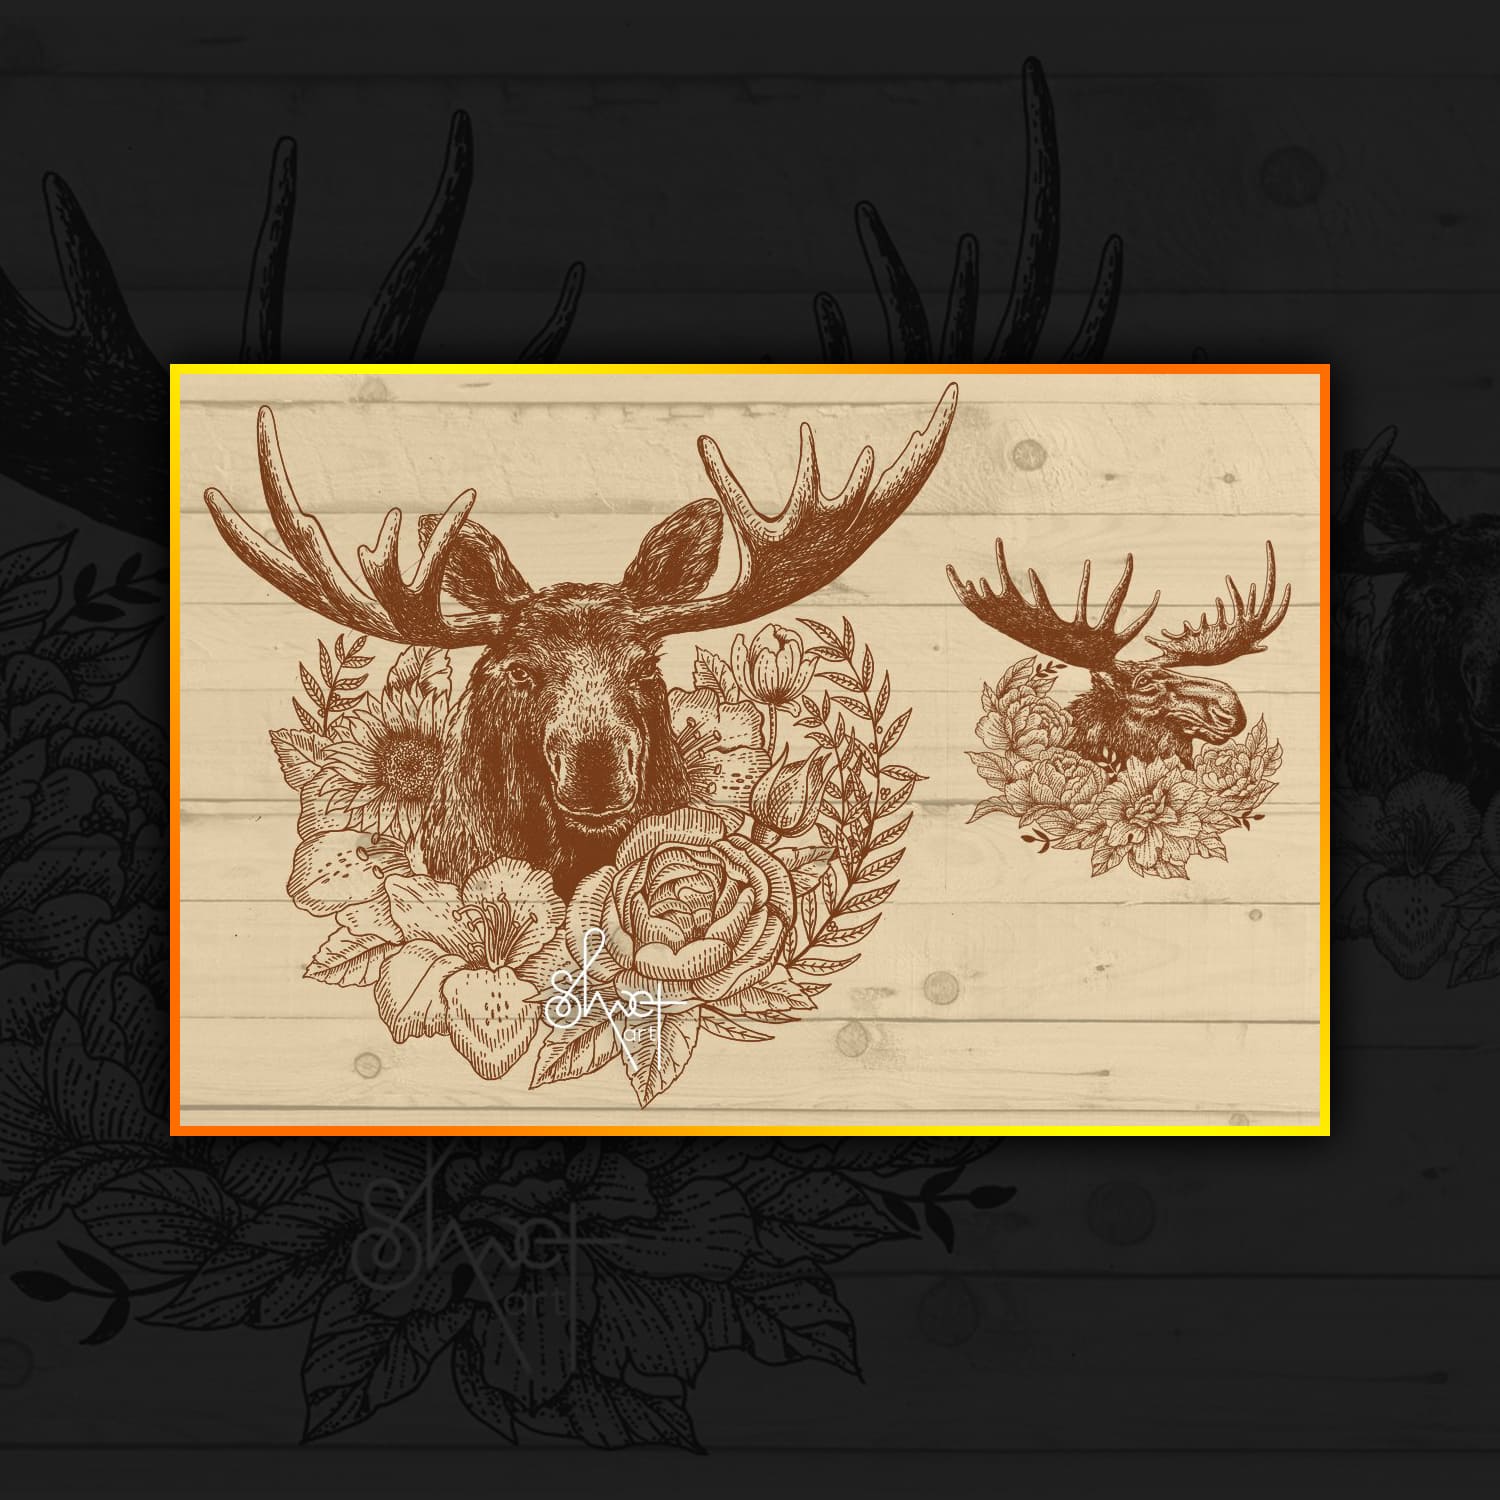 Moose illustration with wreath cover.